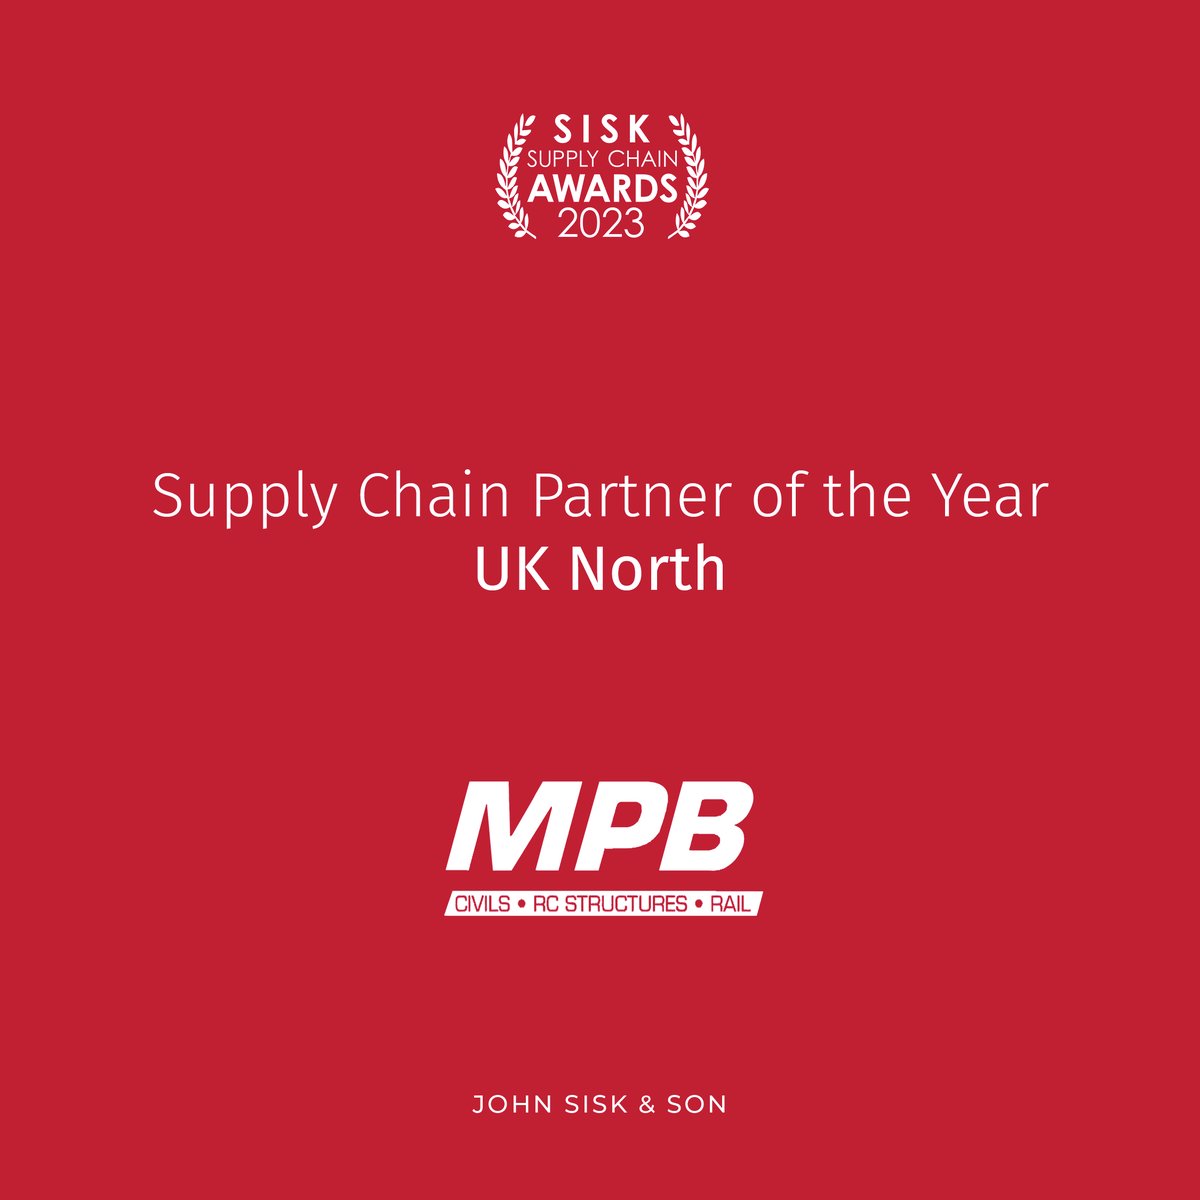 Congrats to MPB our winners in the ‘Supply Chain Partner of the Year – UK North’ category! #BuiltBySisk